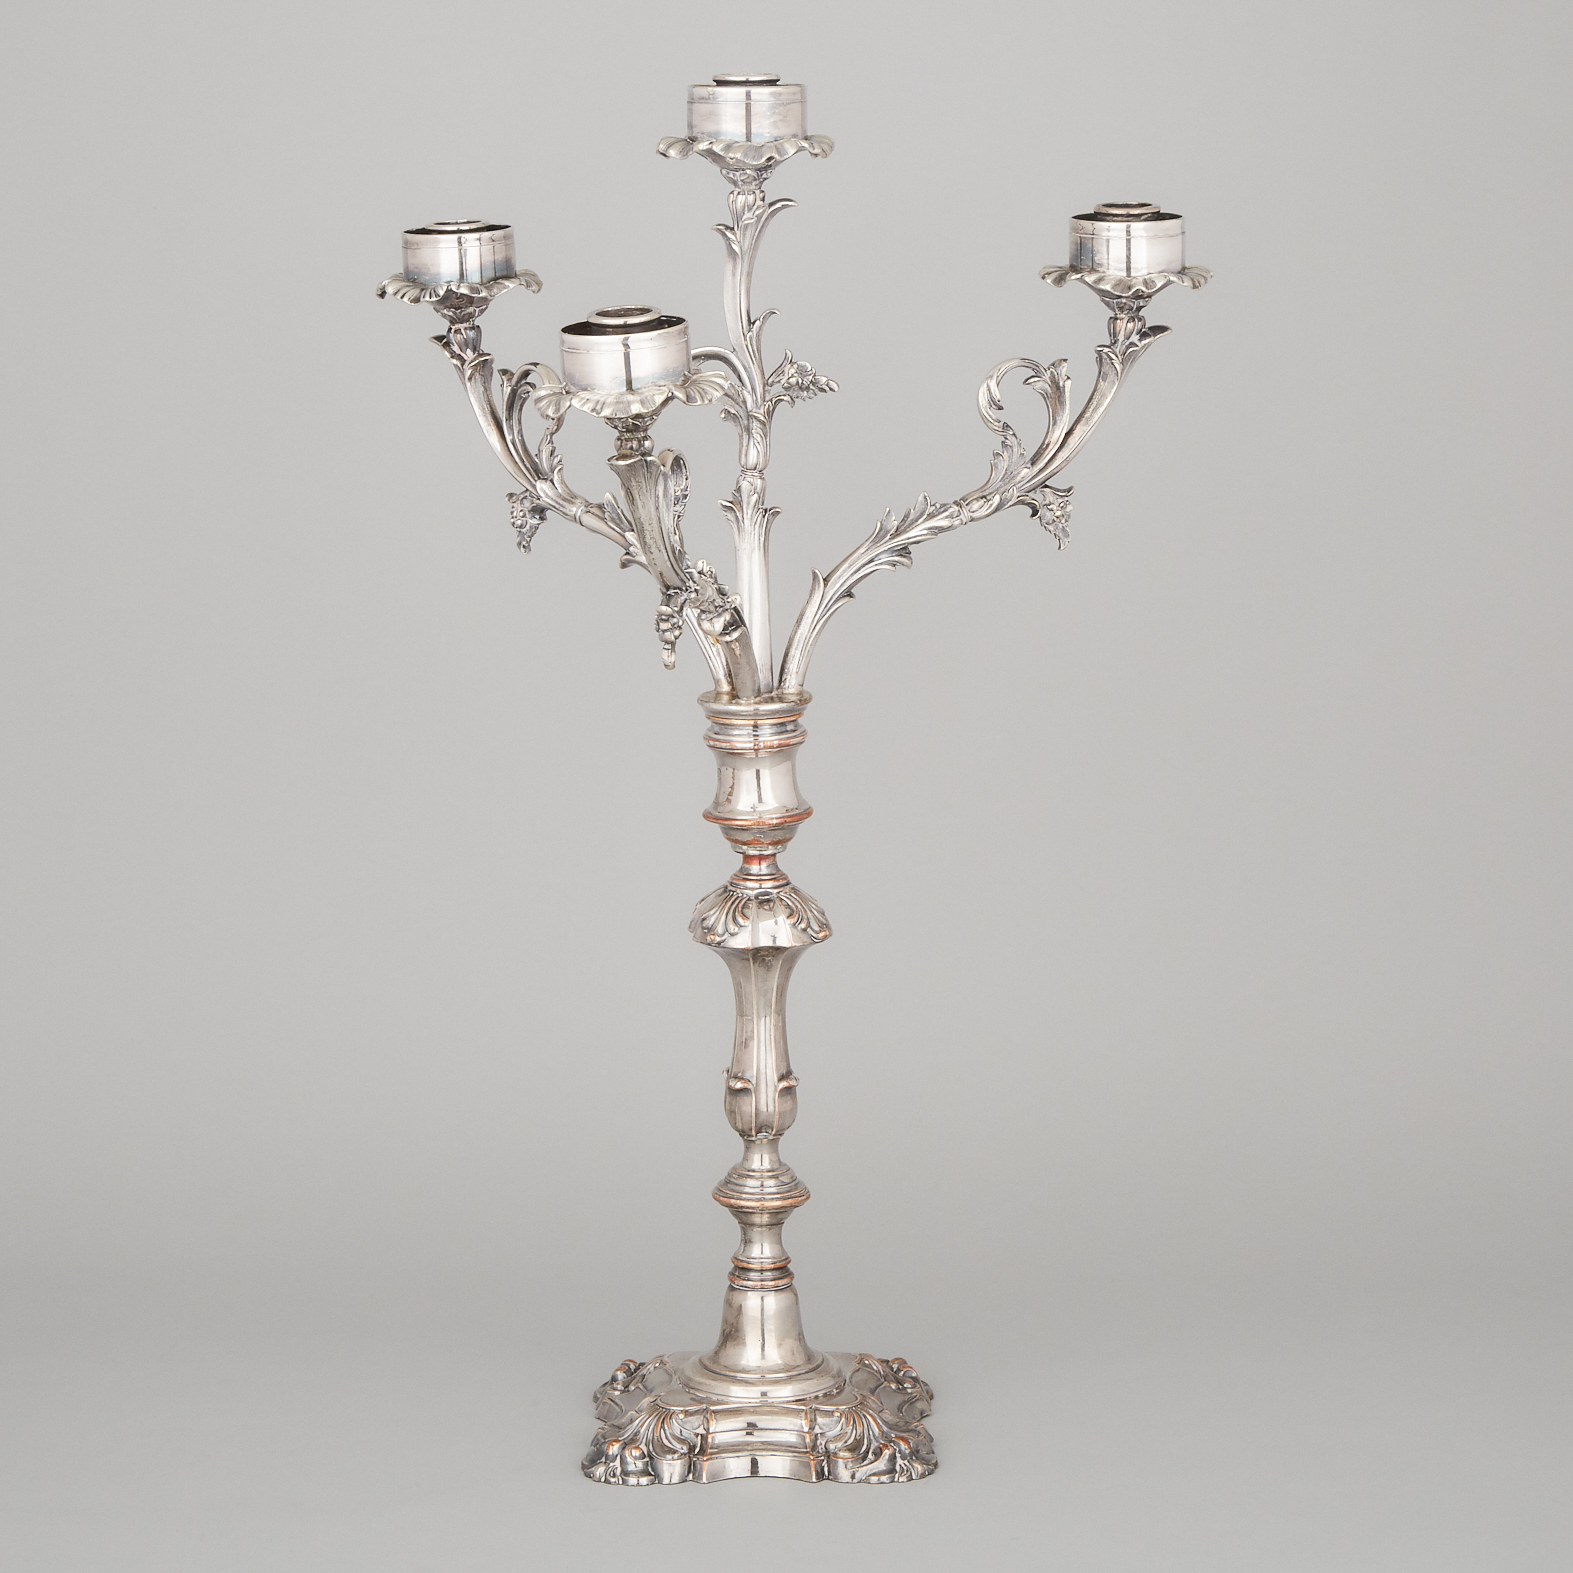 Victorian Silver Plated Four-Light Candelabrum, mid-19th century